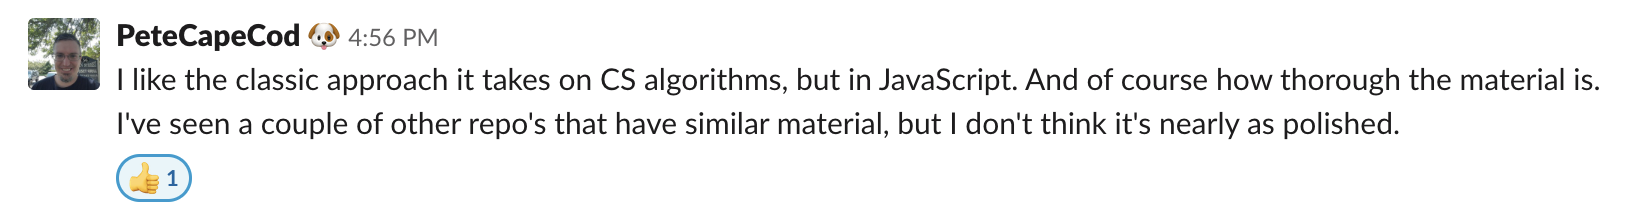 I like the classic approach it takes on CS algorithms, but in JavaScript. And of course how thorough the material is. I've seen a couple of other repo's that have a similar material, but I don't think it's nearly as polished.